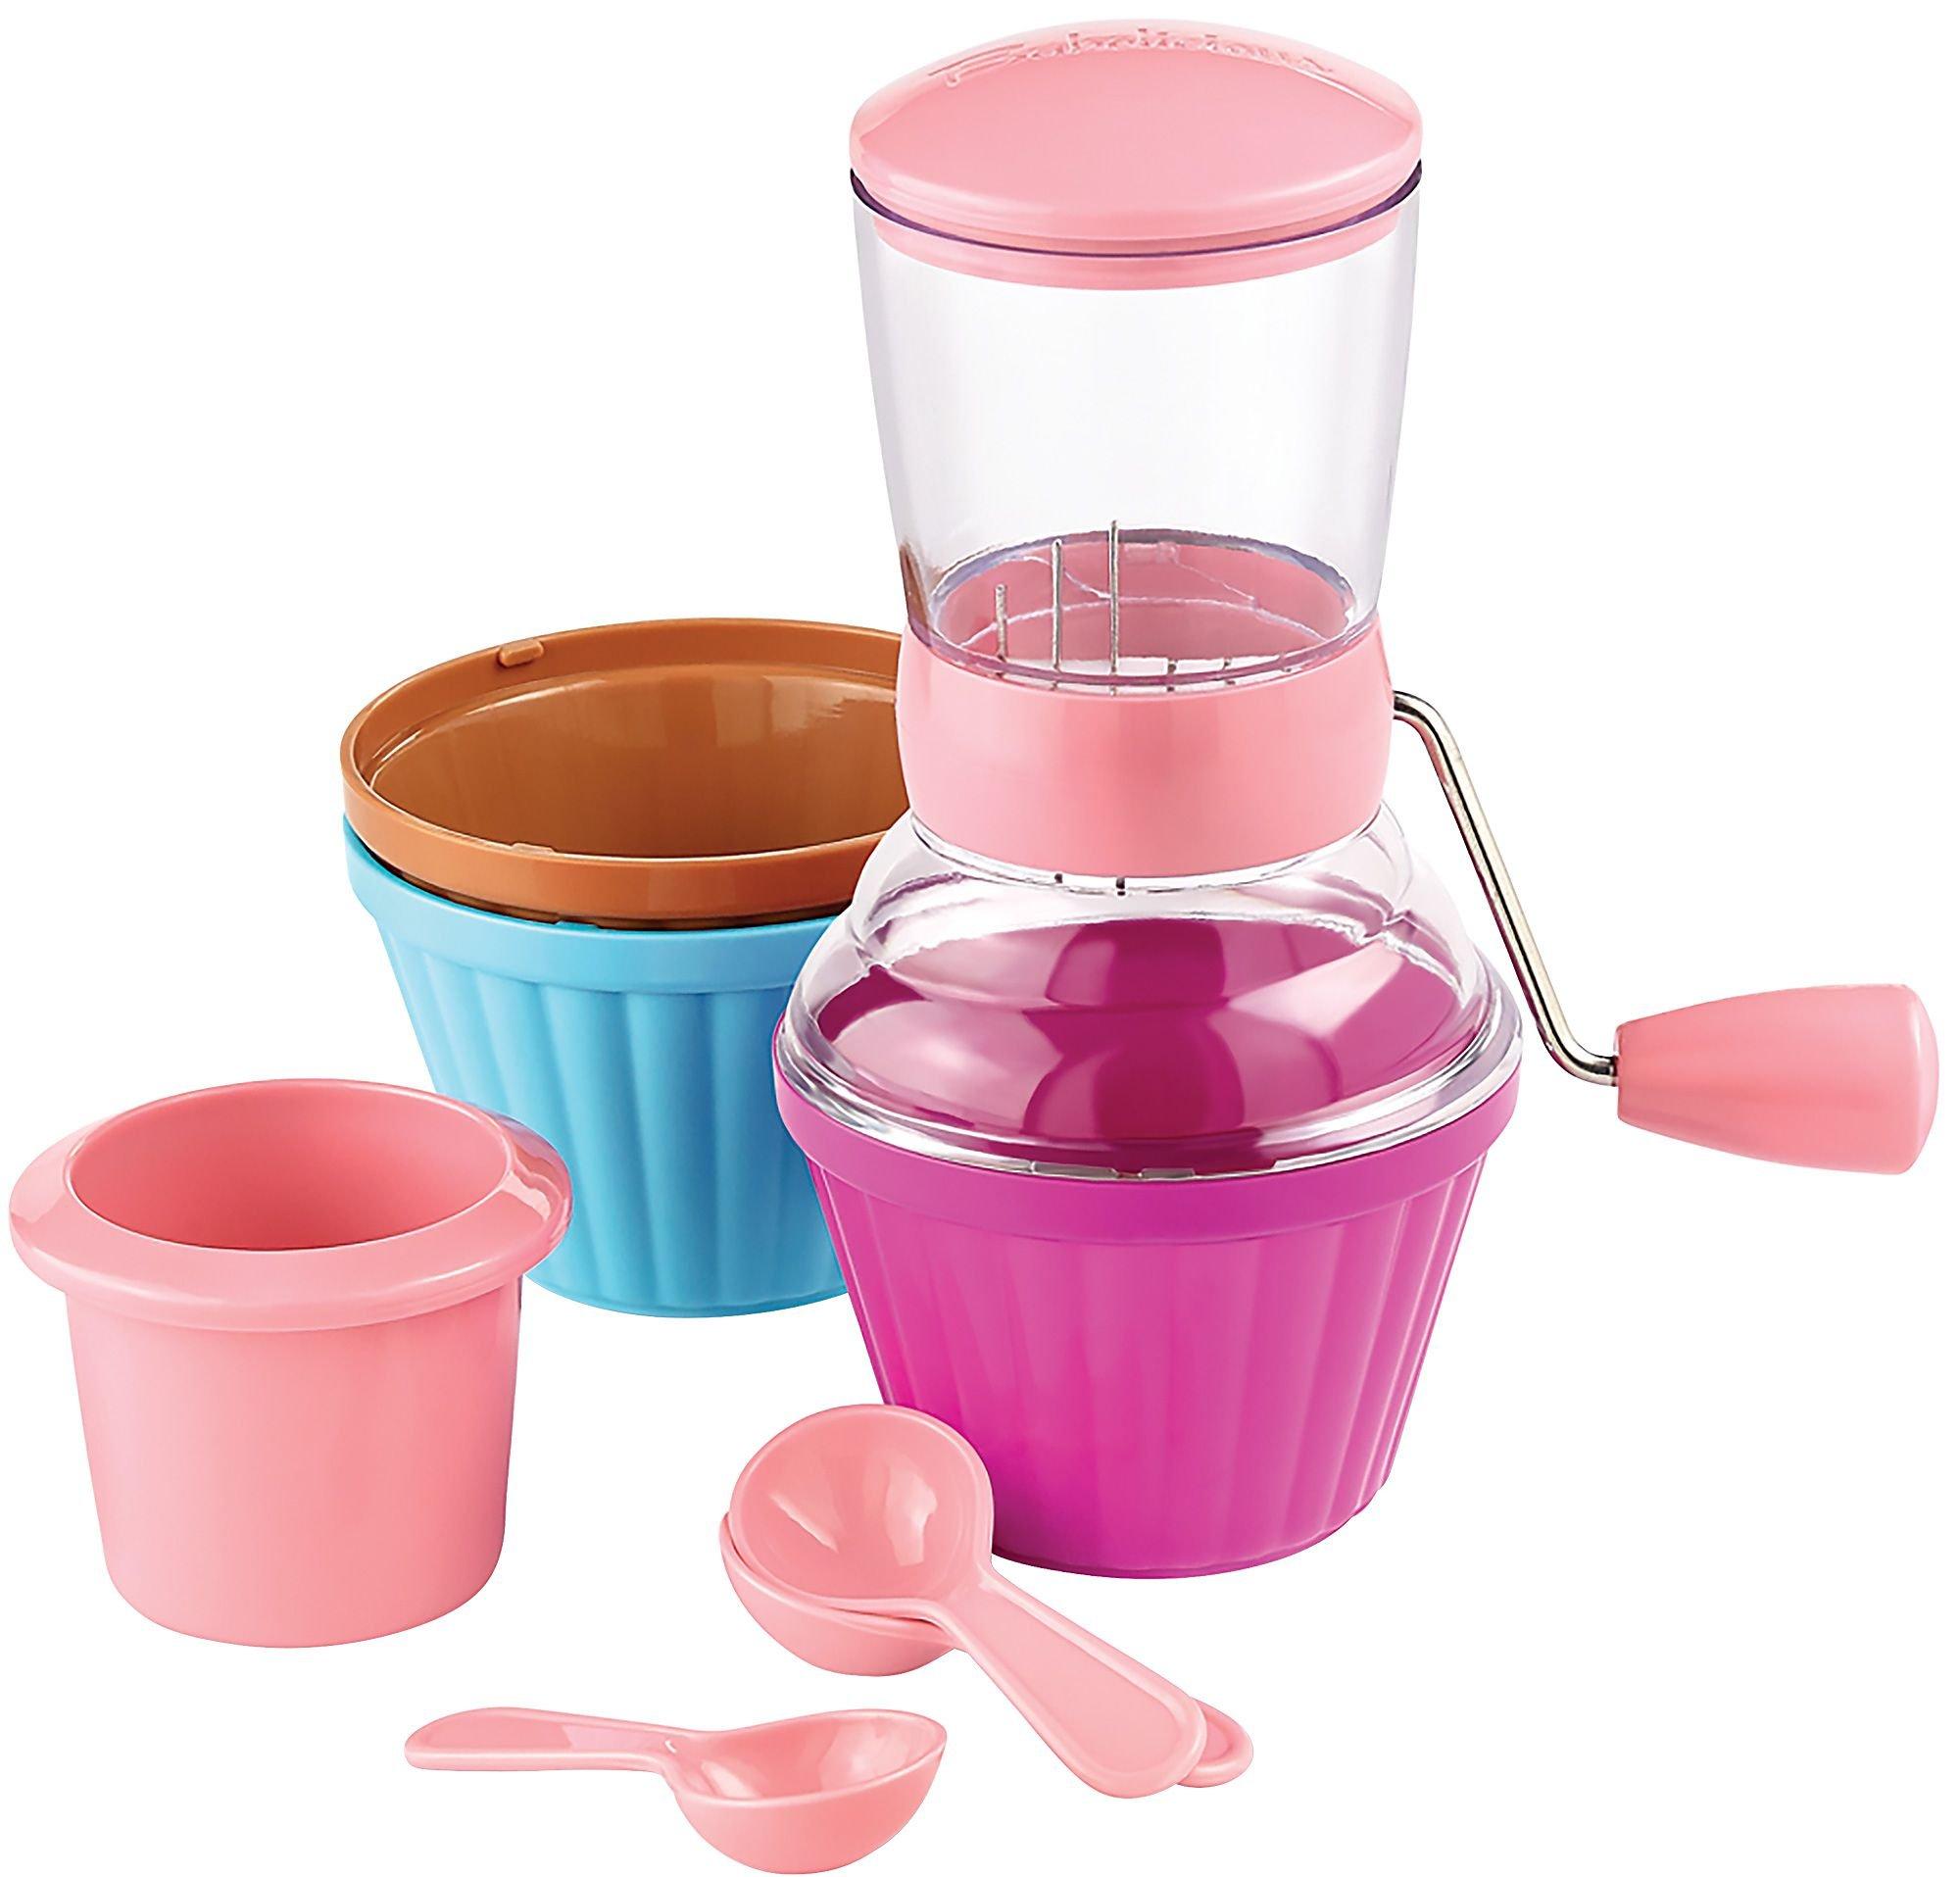 Bakelicious Candy Crusher 9pc